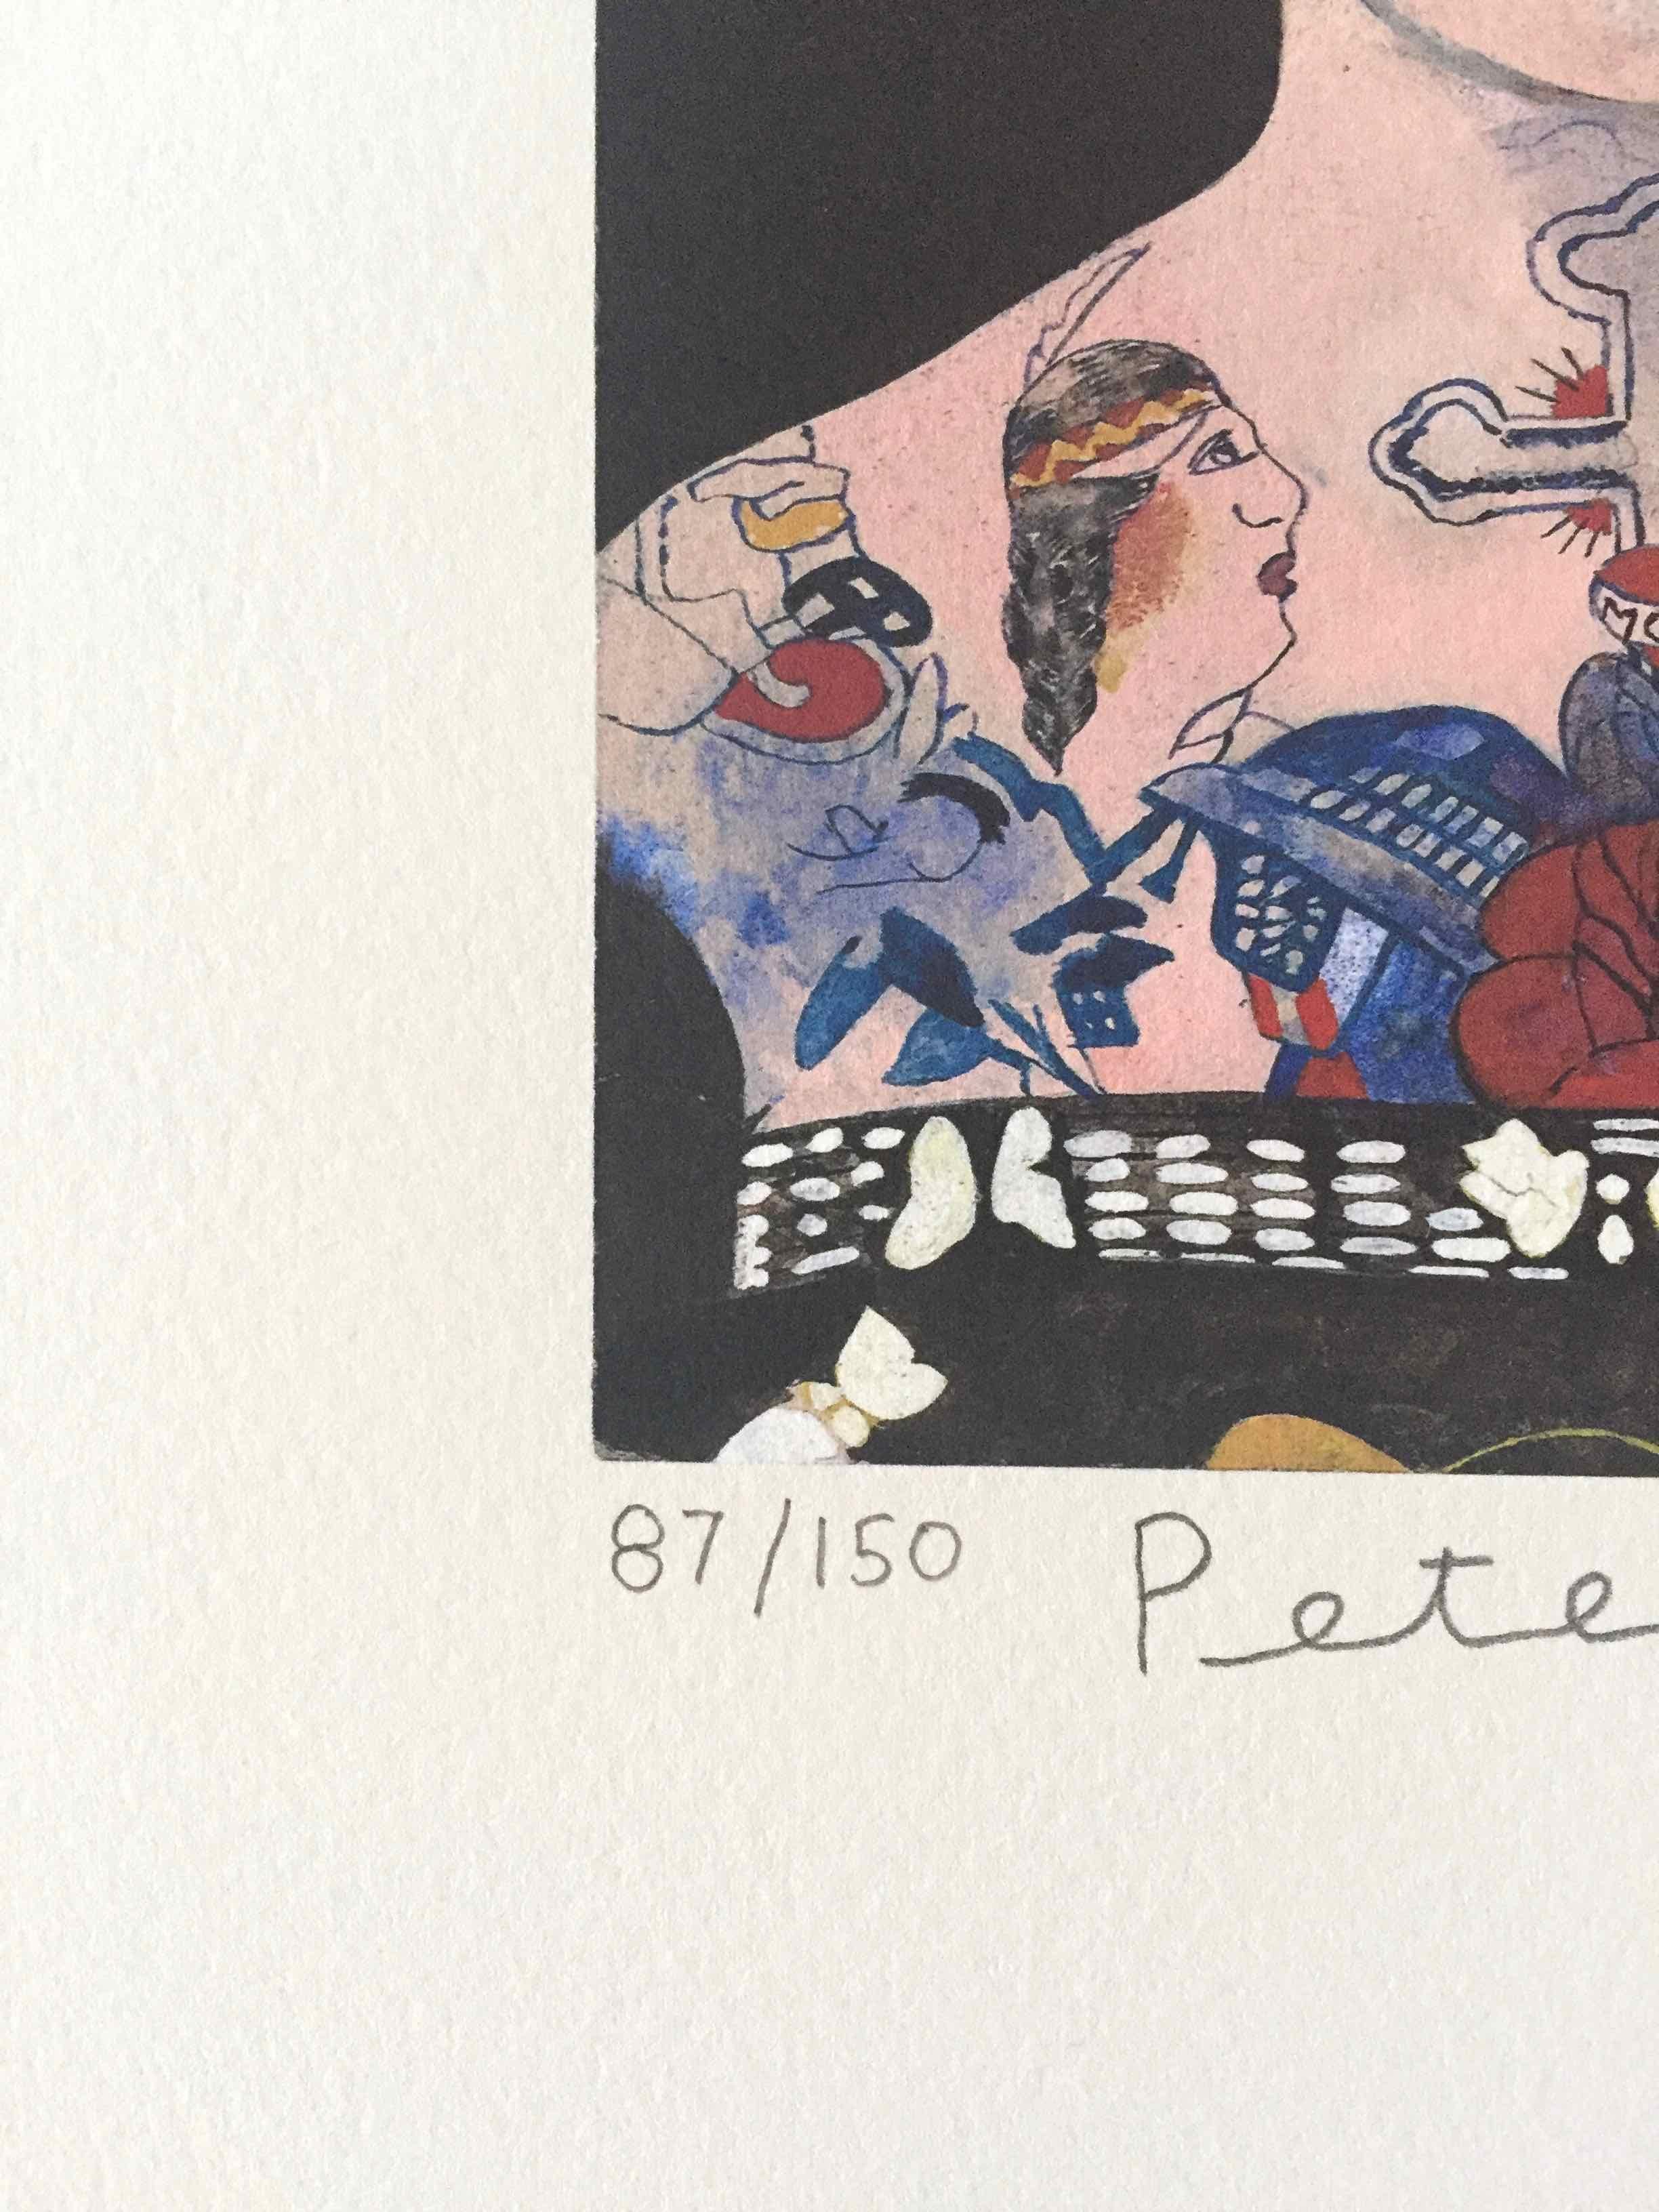 Widely regarded as the godfather of British Pop art and the Young British Artists movement, Sir Peter Blake creates paintings, collages, and prints that blend modernity and nostalgia. Though best known for designing the album cover for the Beatles